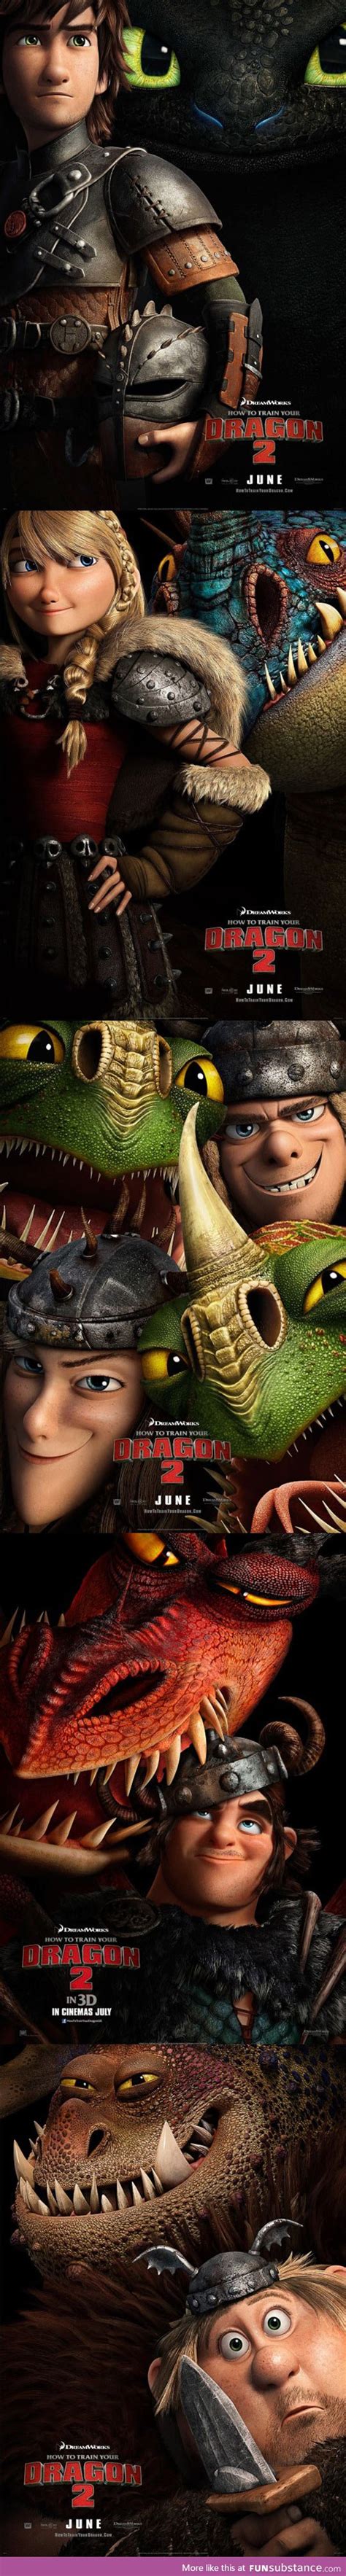 This Movie Can T Come Soon Enough Dreamworks Movies Dreamworks Dragons